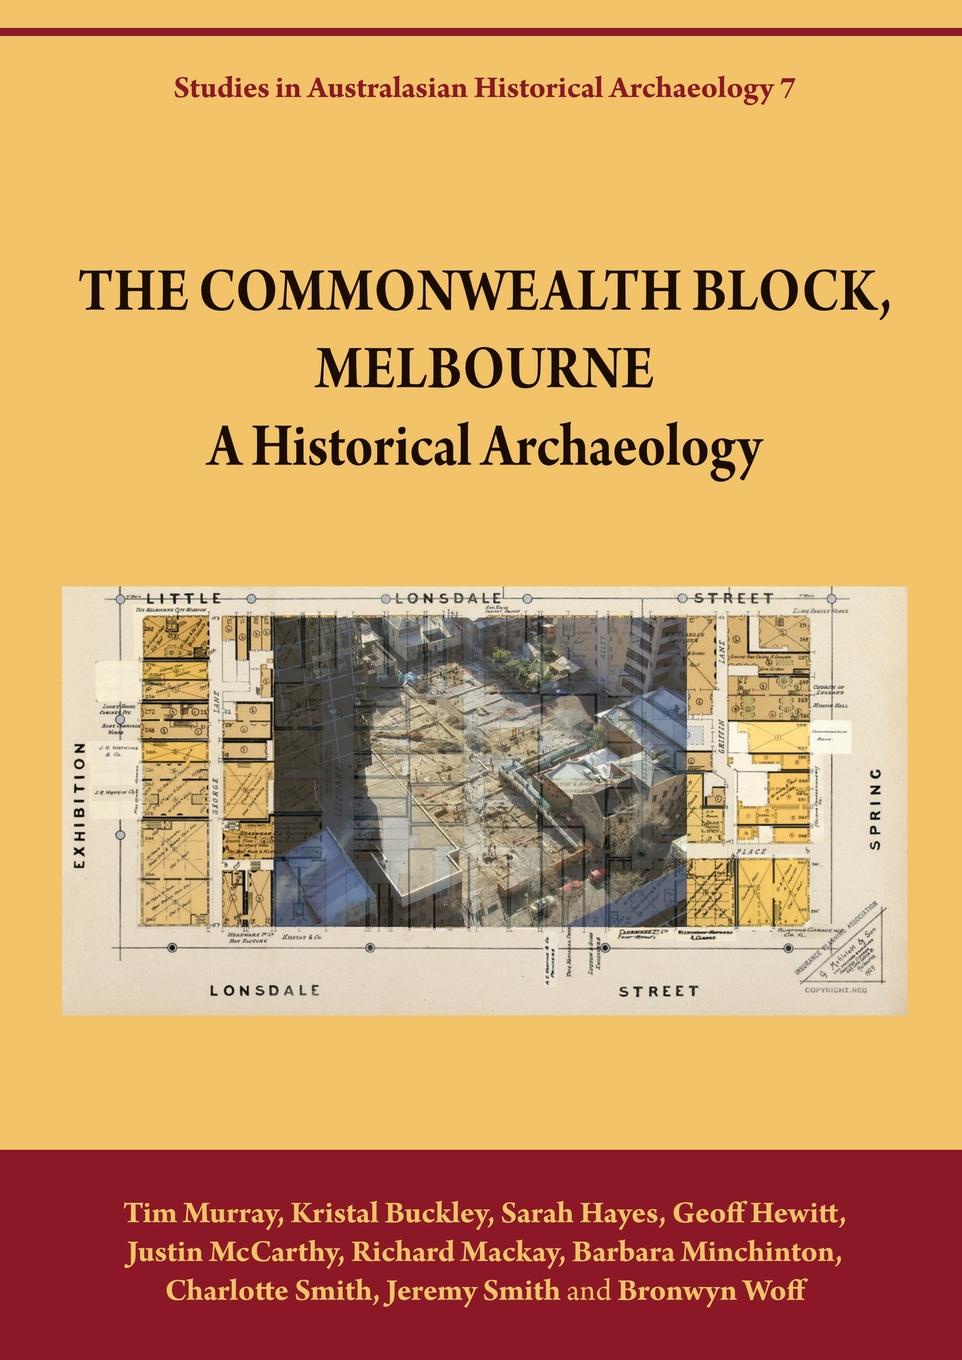 The Commonwealth Block, Melbourne. A Historical Archaeology